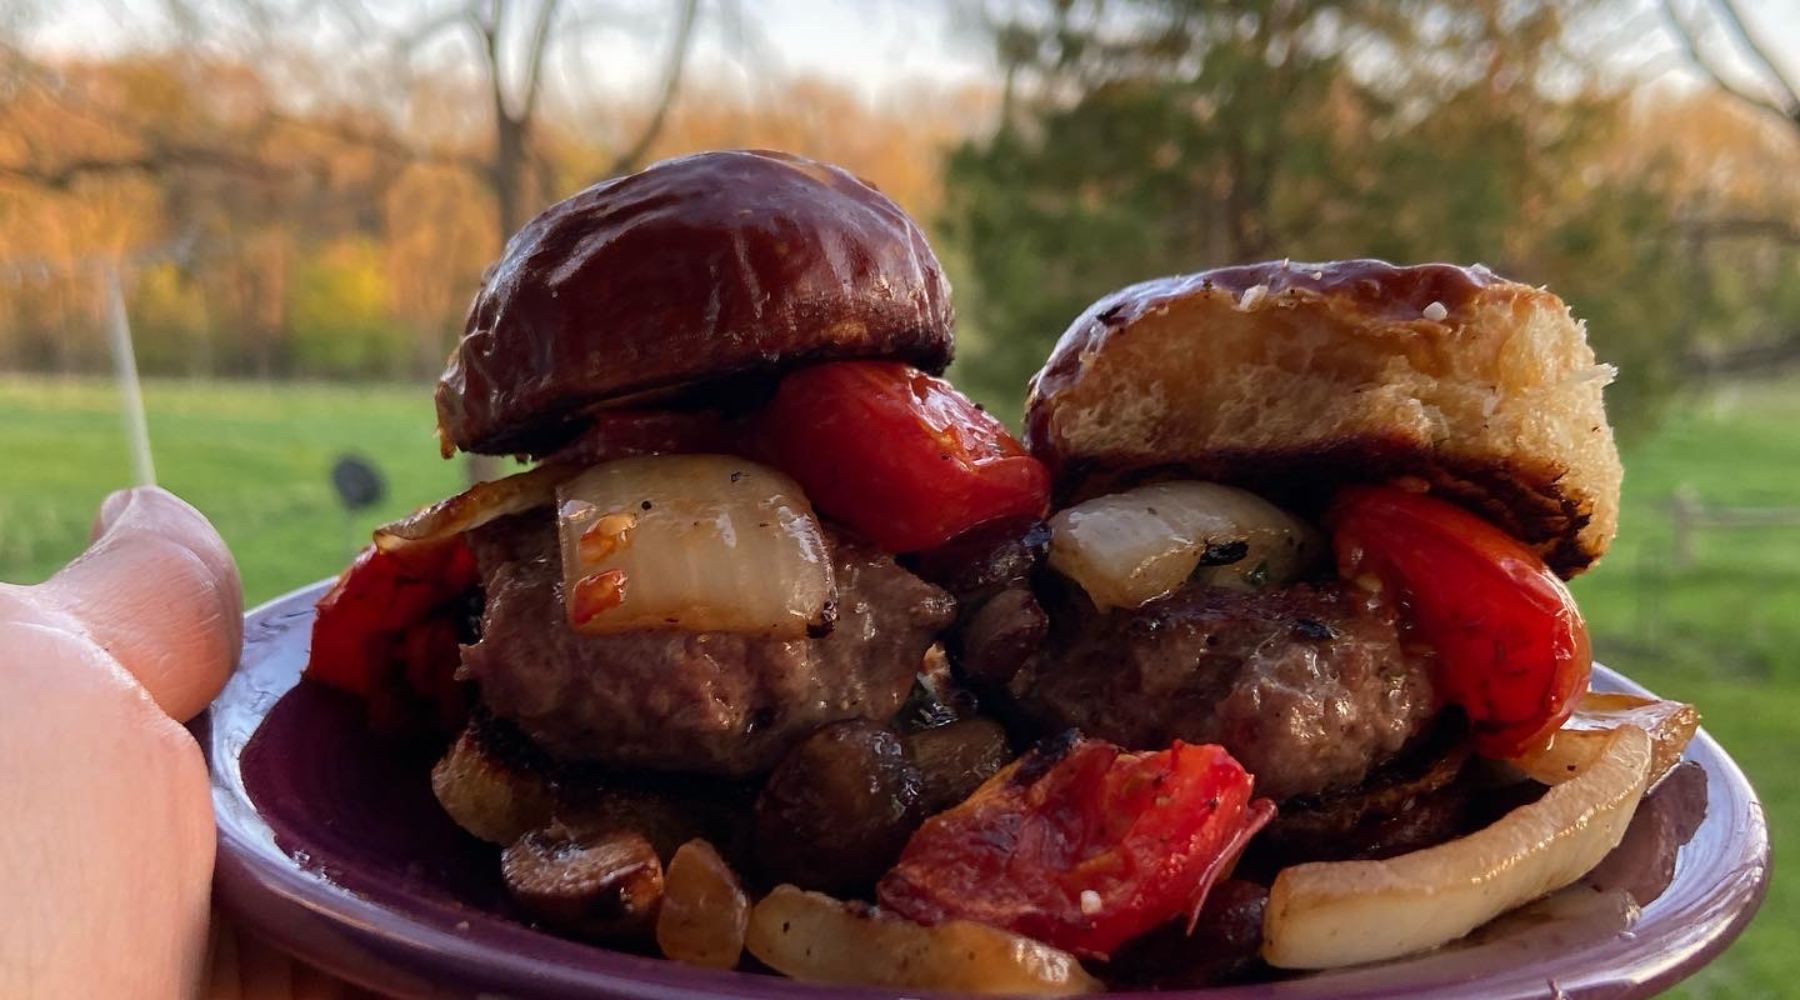 Andrew Zimmern's Goat Butter Burger with Mushrooms and Oven-Dried Tomatoes